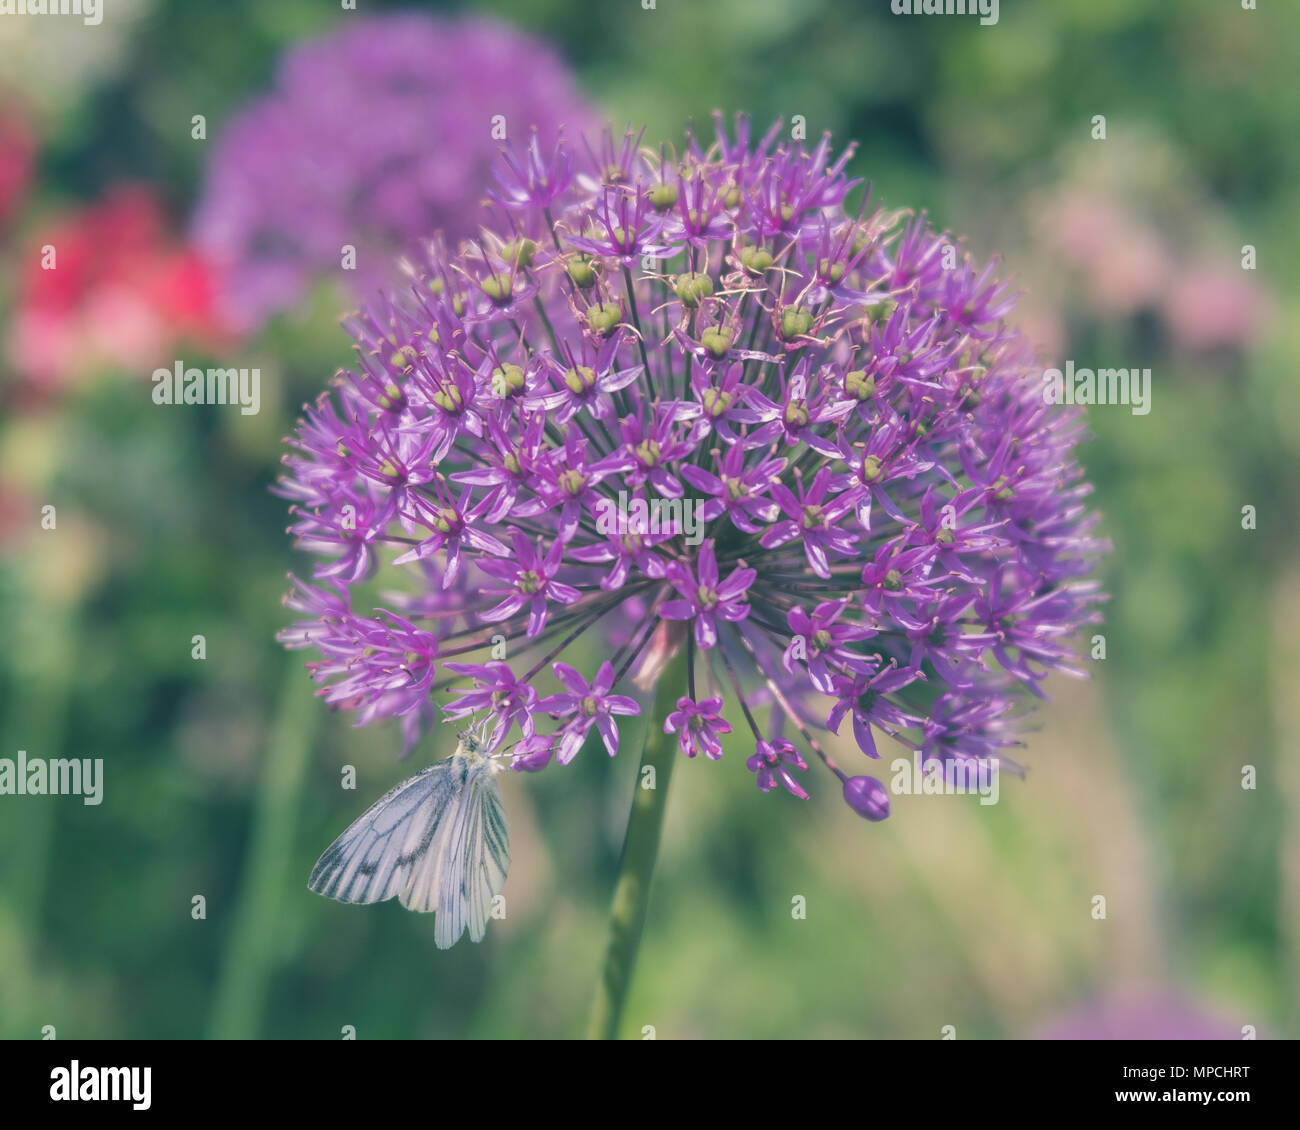 Allium Flower with Cabbage White Butterfly Stock Photo